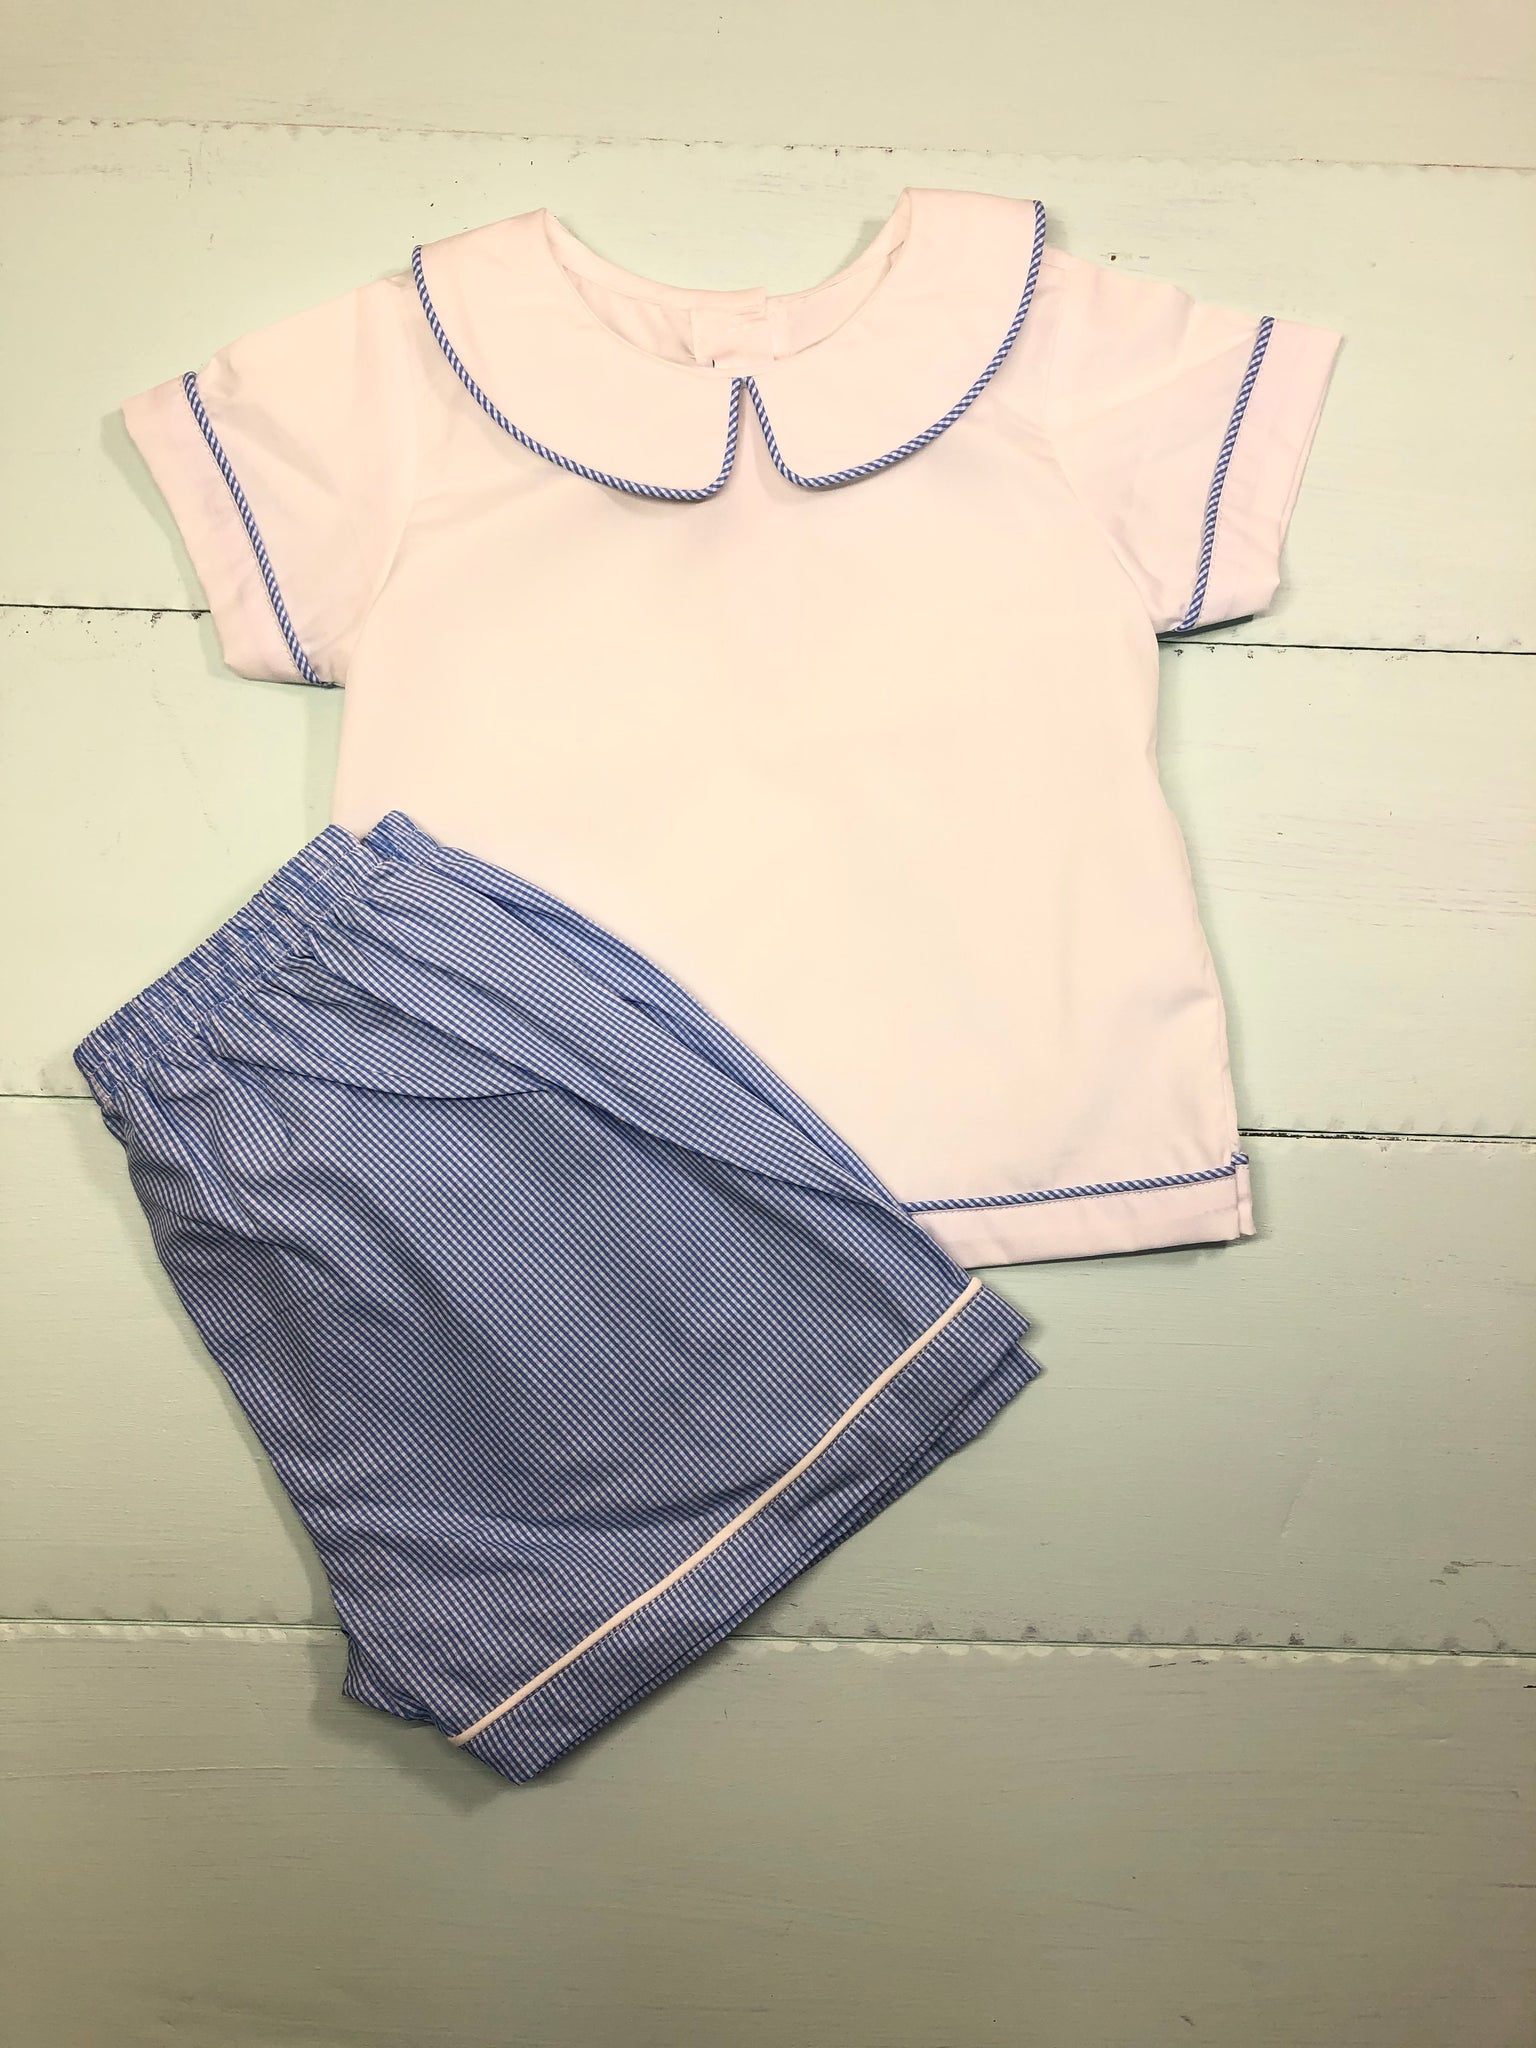 Blue and white brothers shorts set